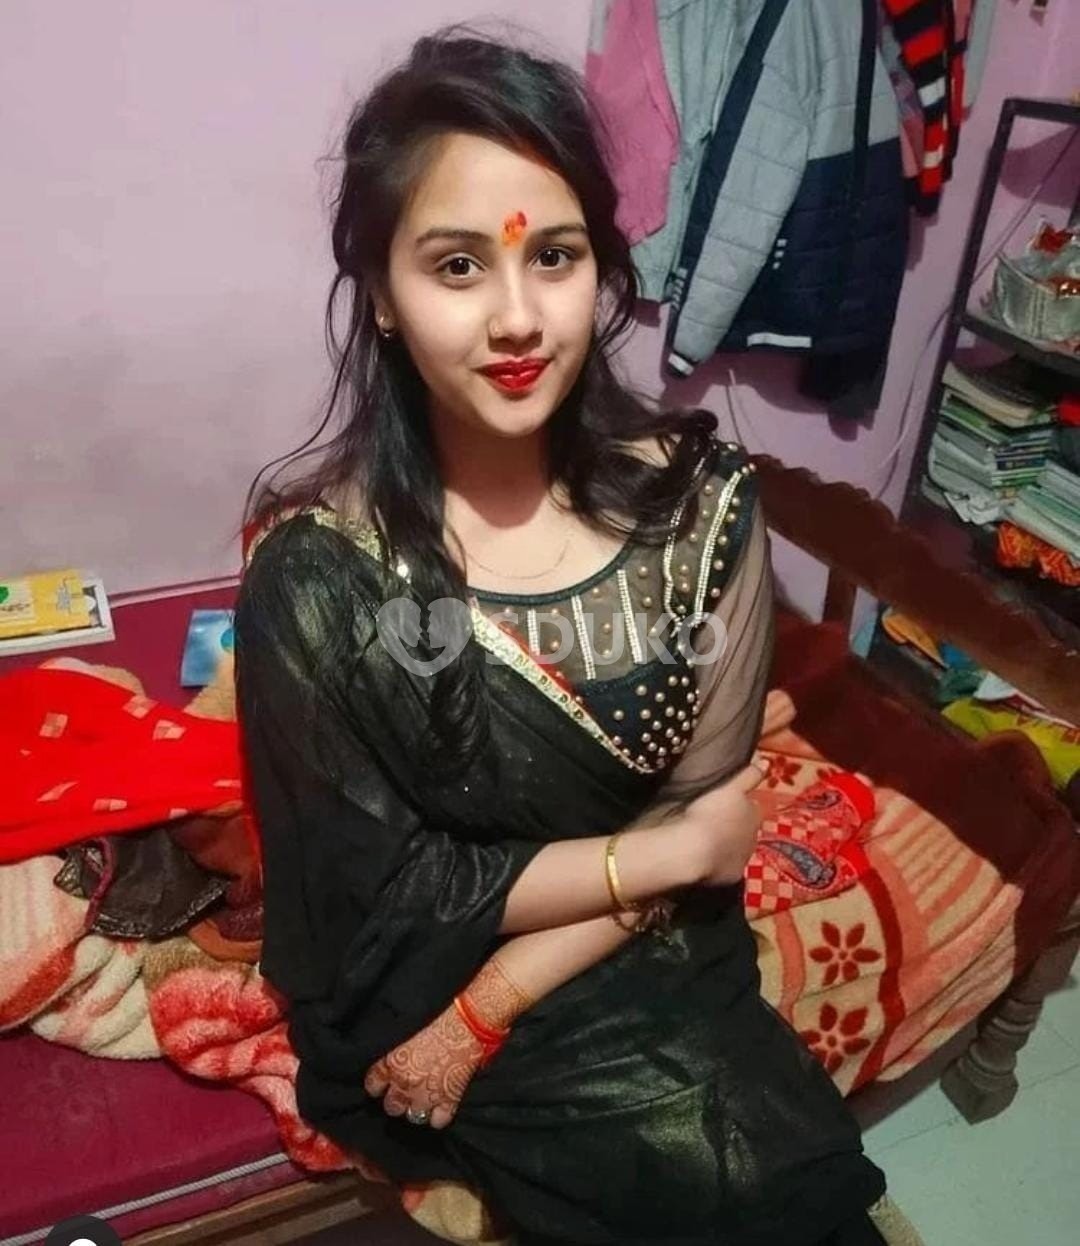 Firozabad,,myself,,, Mallika,TODAY LOW PRICE 100% SAFE AND SECURE GENUINE CALL GIRL AFFORDABLE PRICE CALL NOW